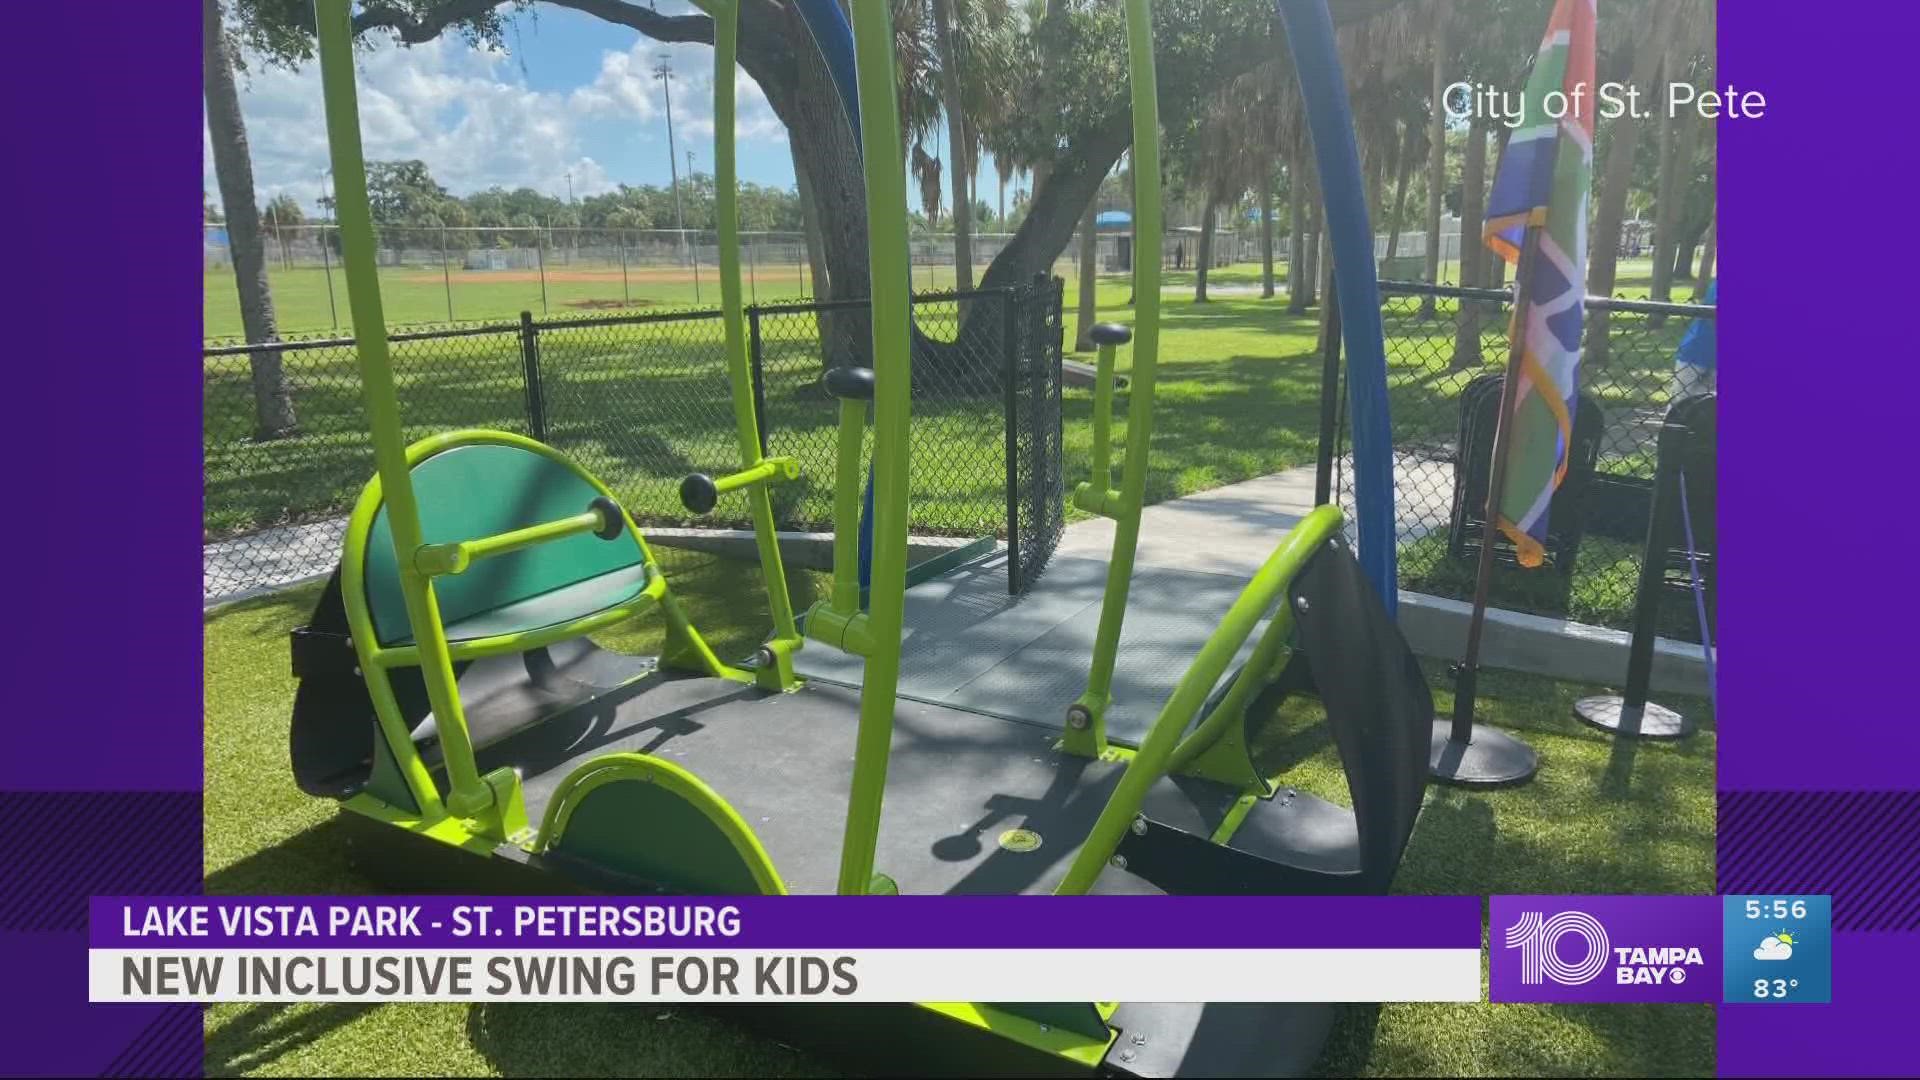 The "We-Go-Swing" features both standard and wheelchair access.